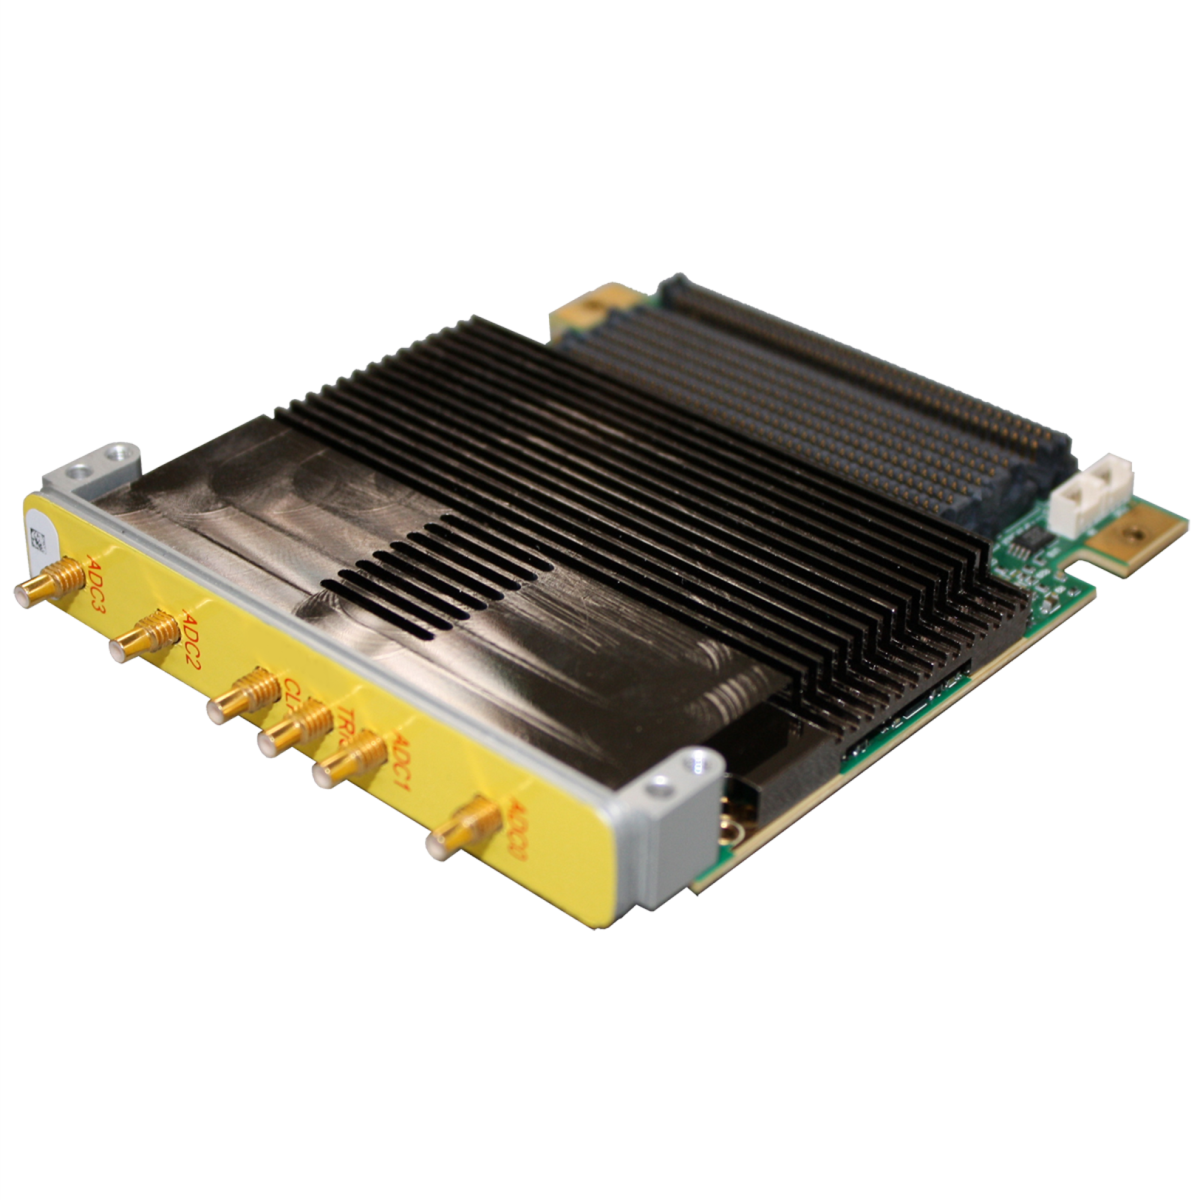 64GS/s ADC & DAC with Jariet Technologies Transceiver